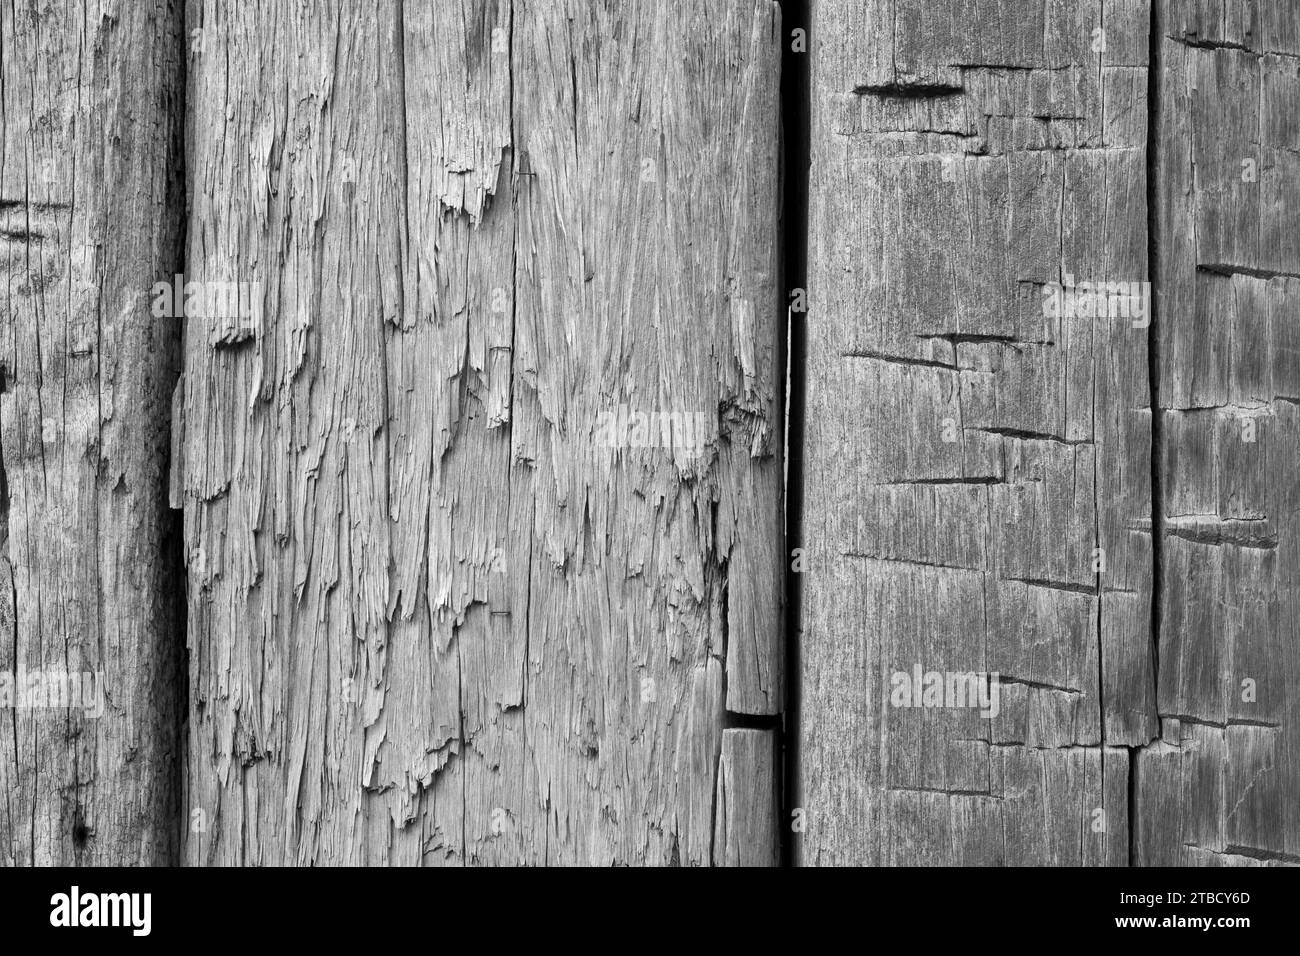 Surface of a wooden wall Stock Photo